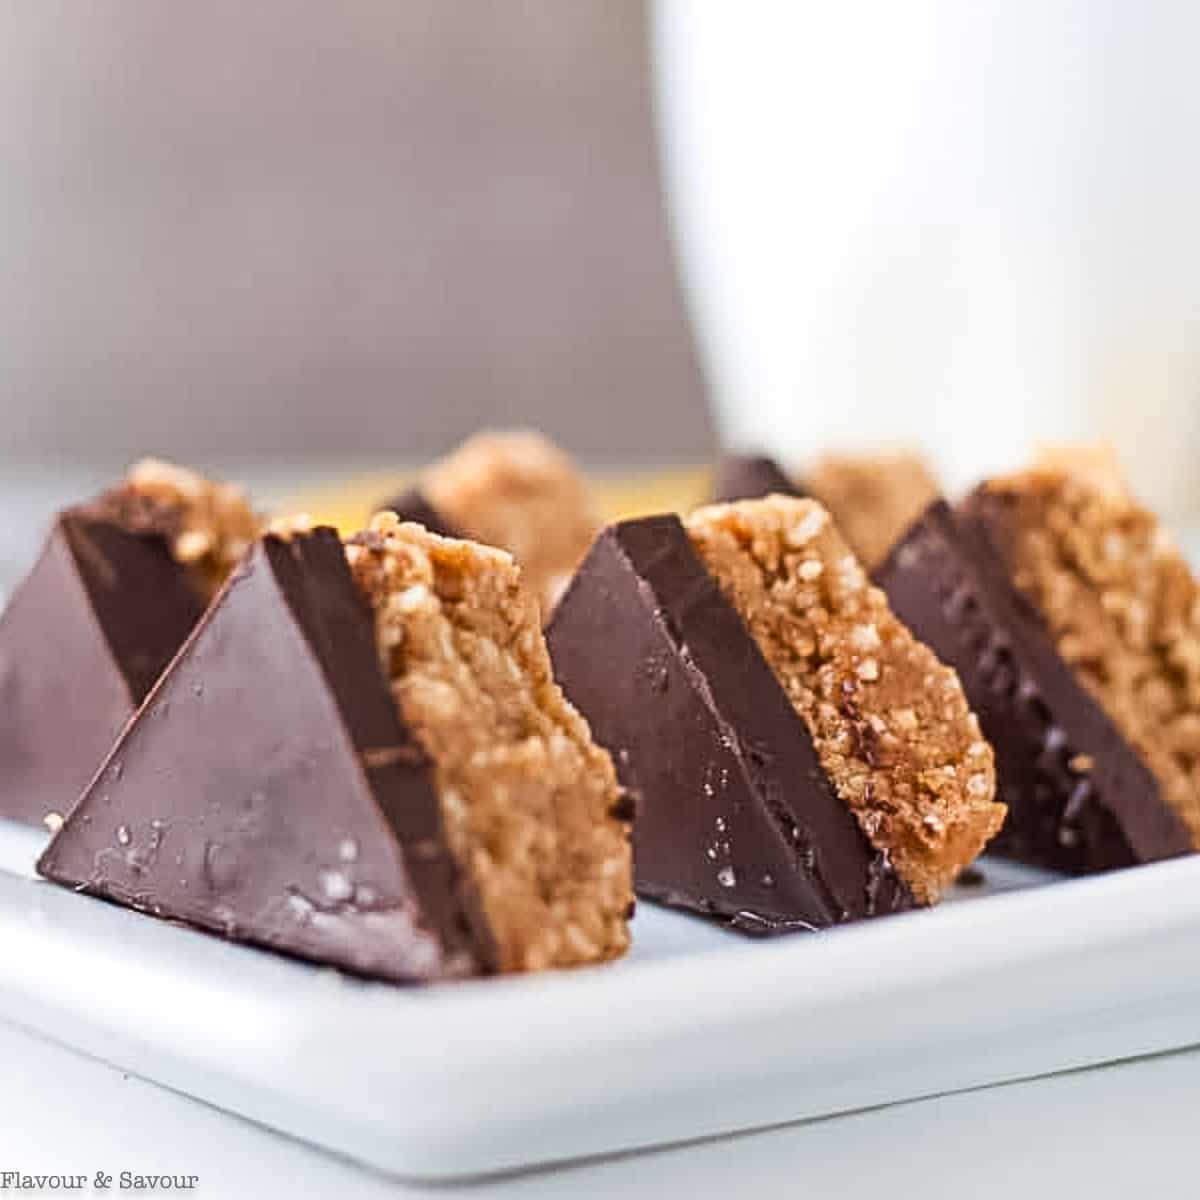 No-bake chocolate peanut butter bars cut in triangle shapes.